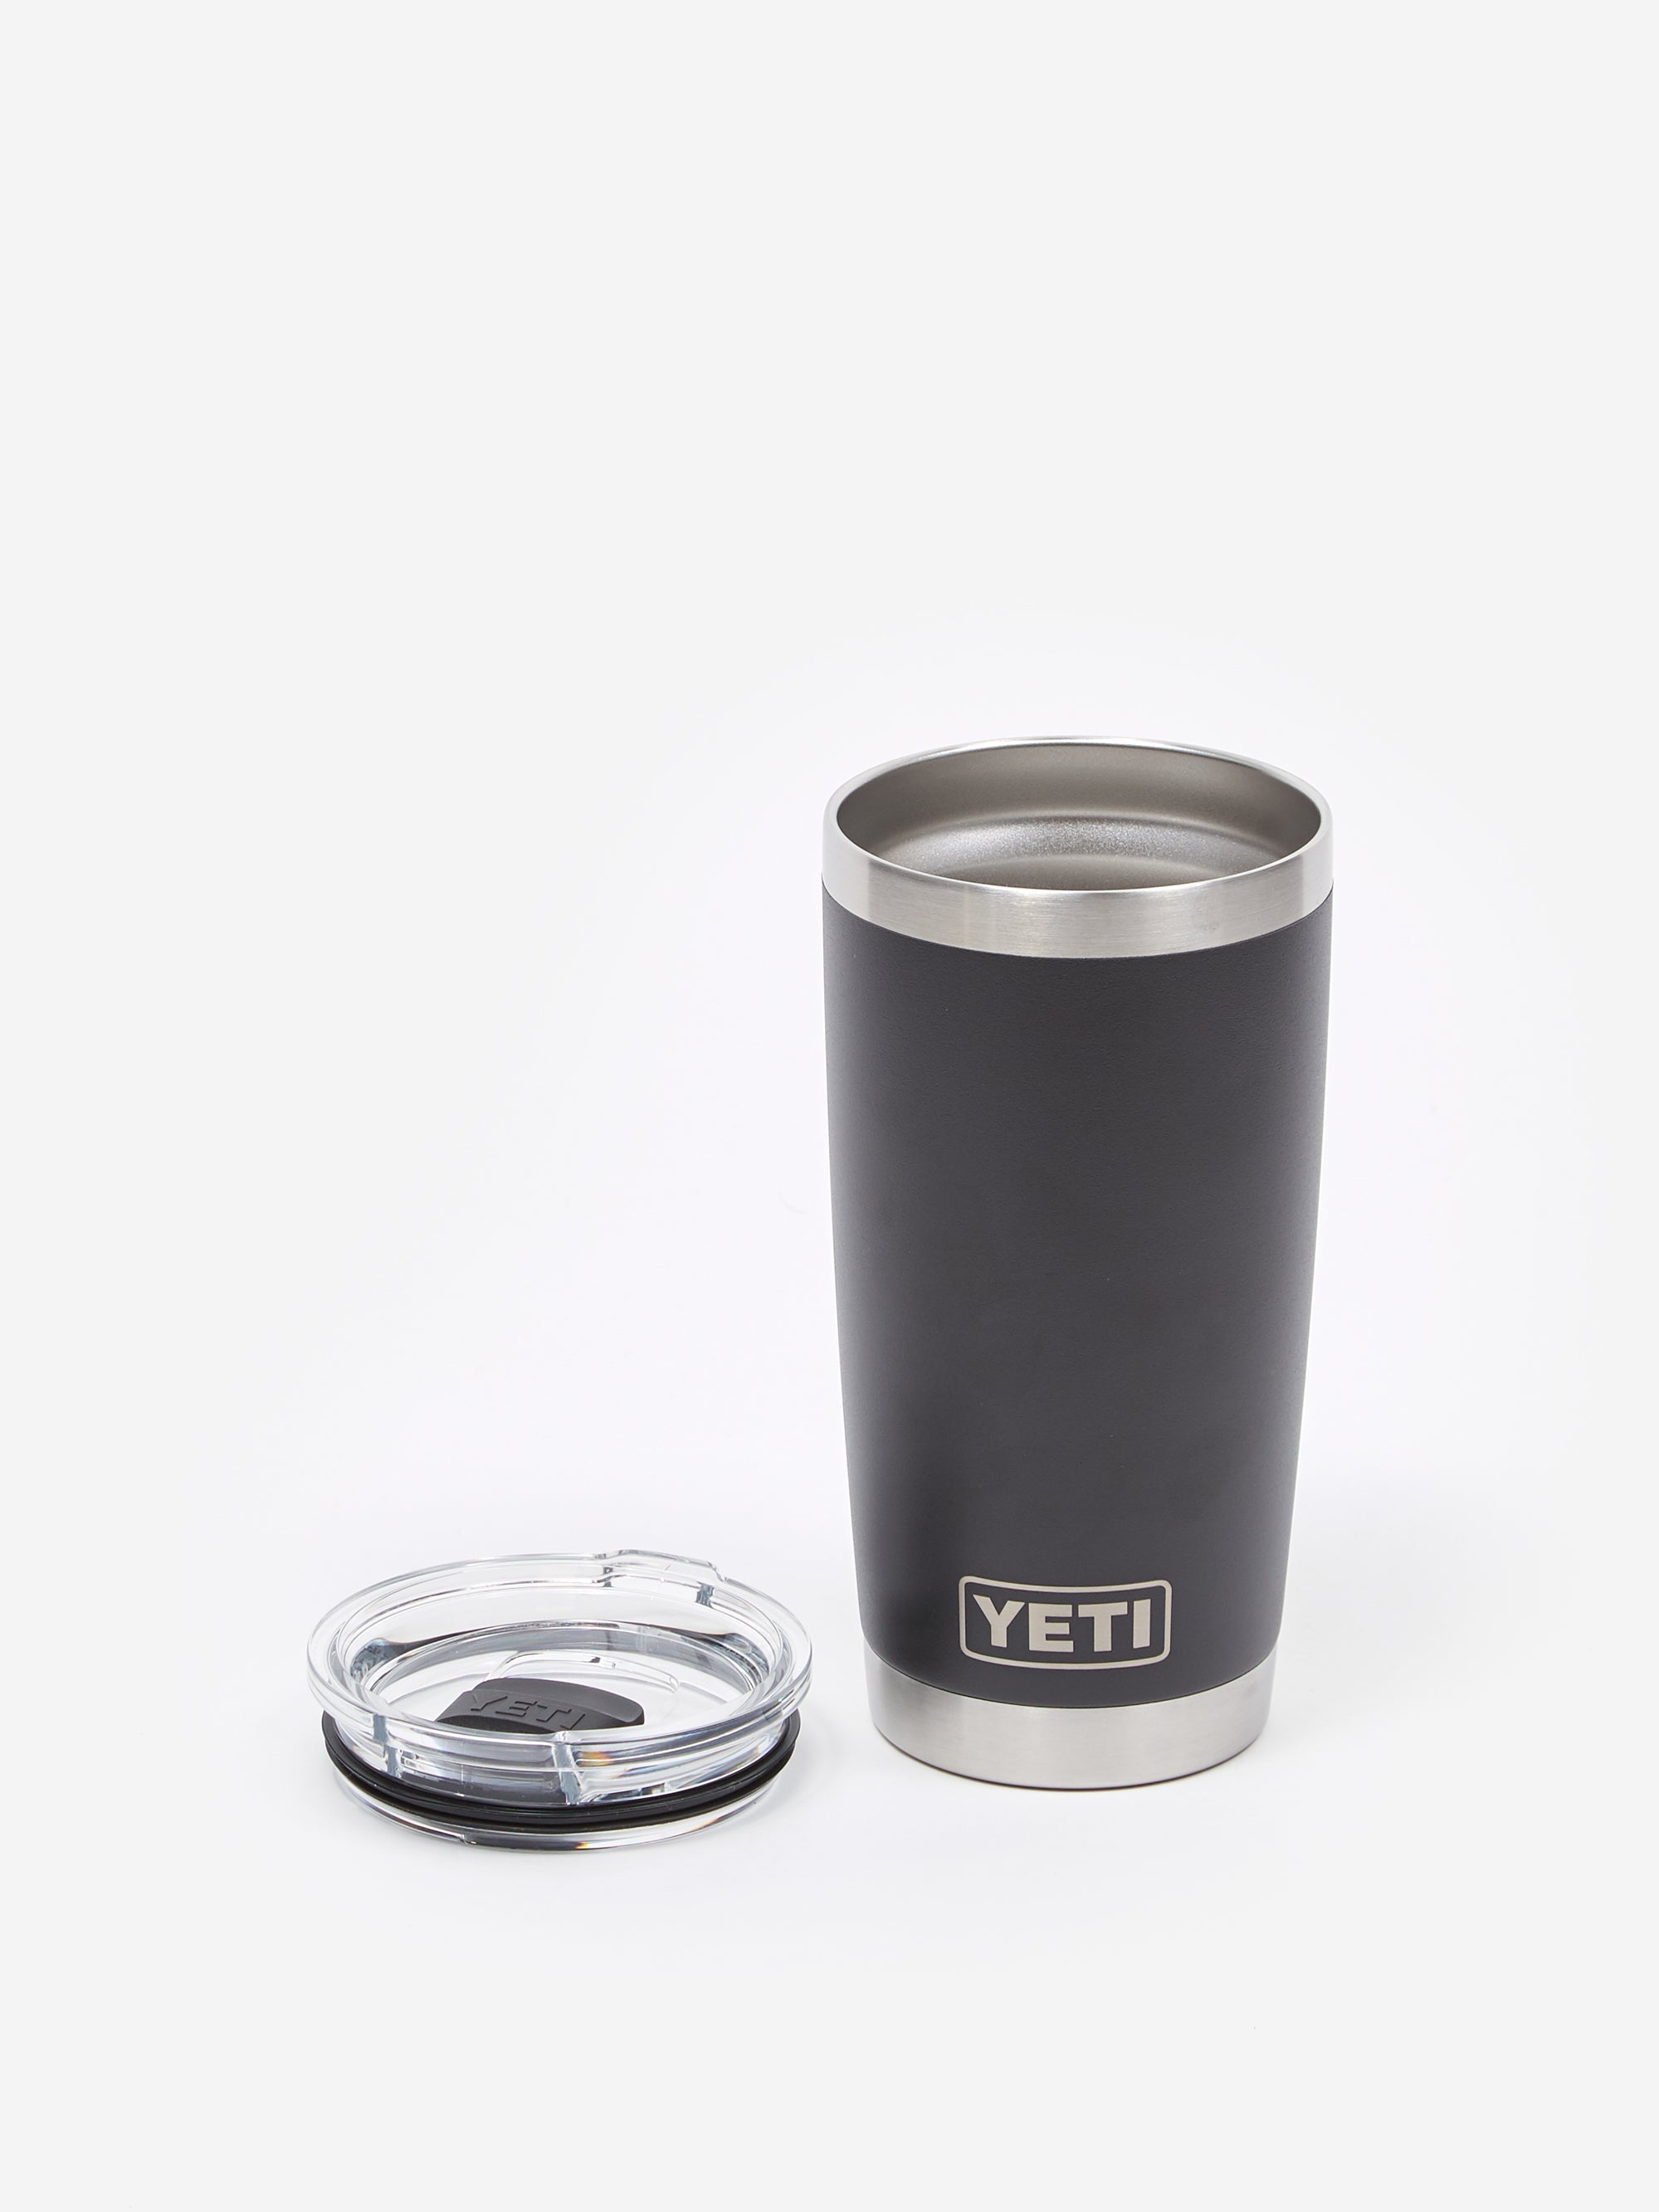 Now in Graphite and Copper 🔥. The 20oz @yeti Rambler Tumbler